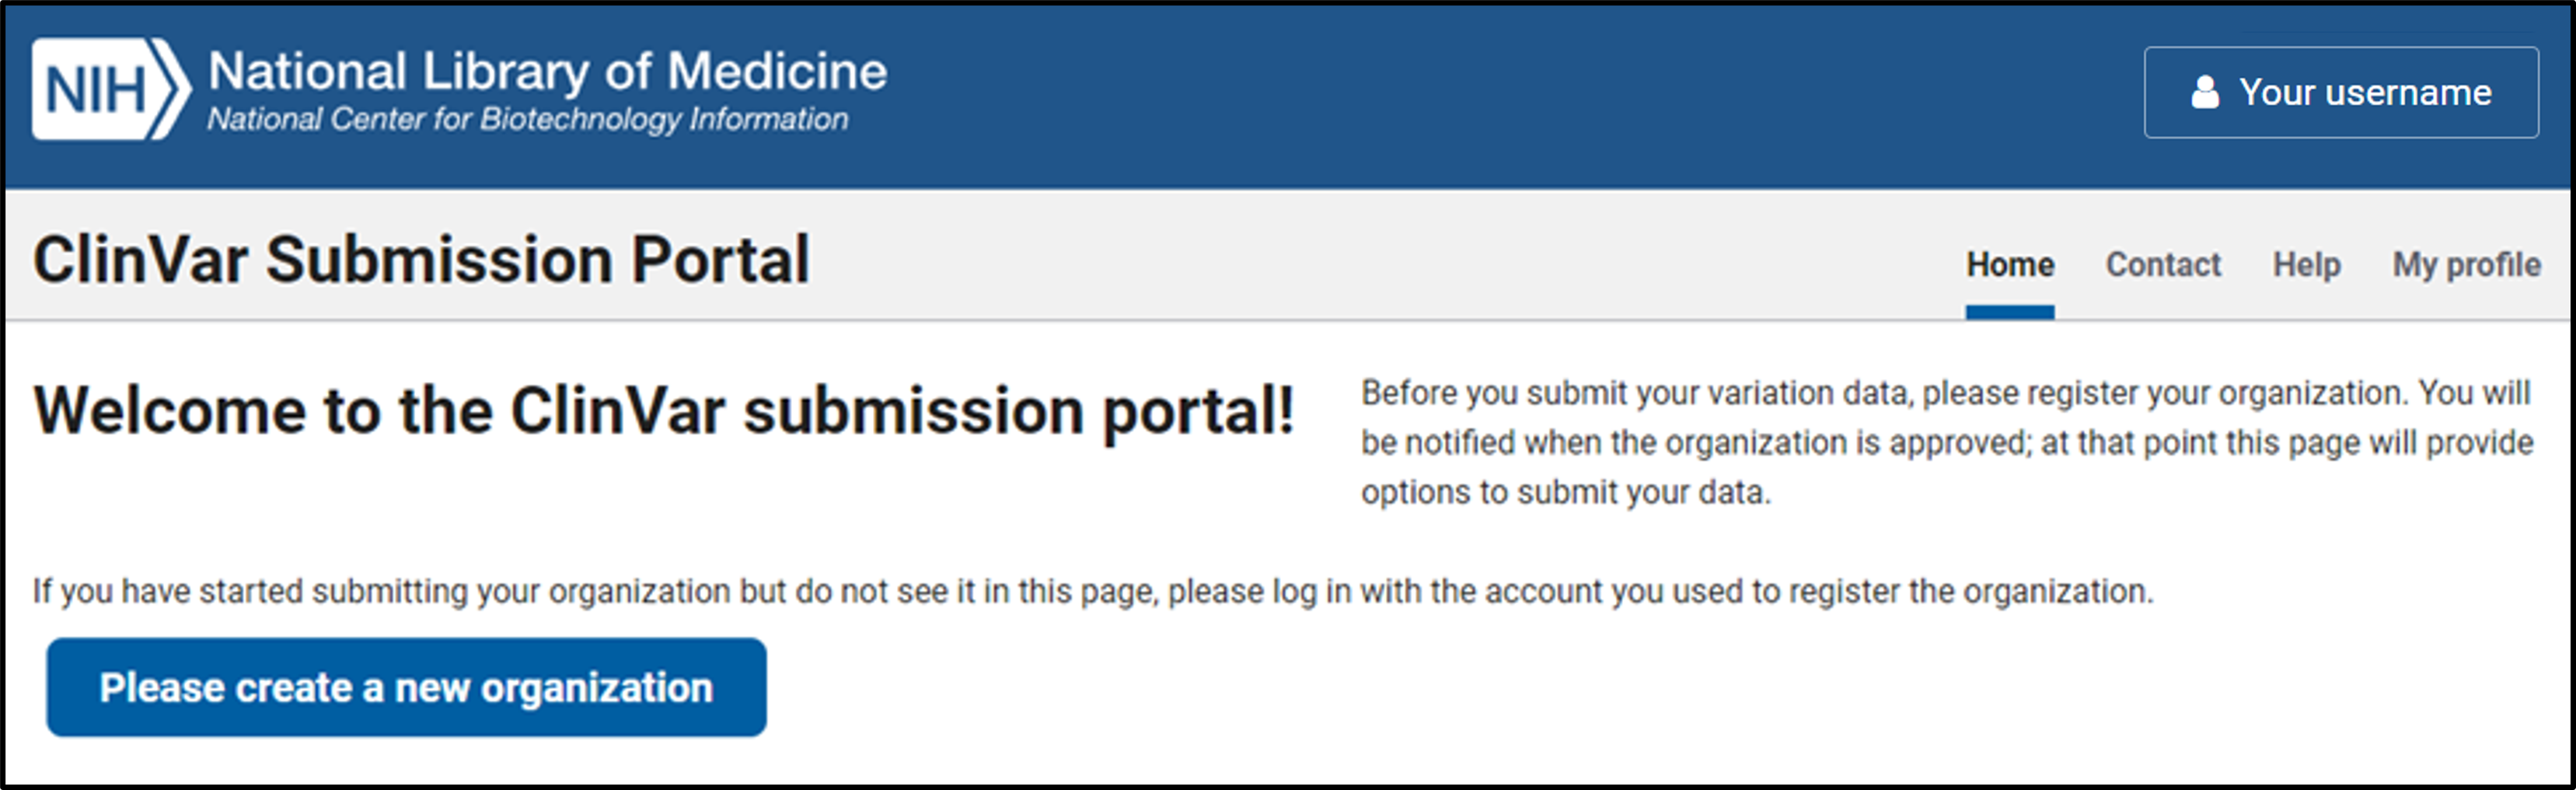 Display with button to create a new organization in ClinVar Submission Portal